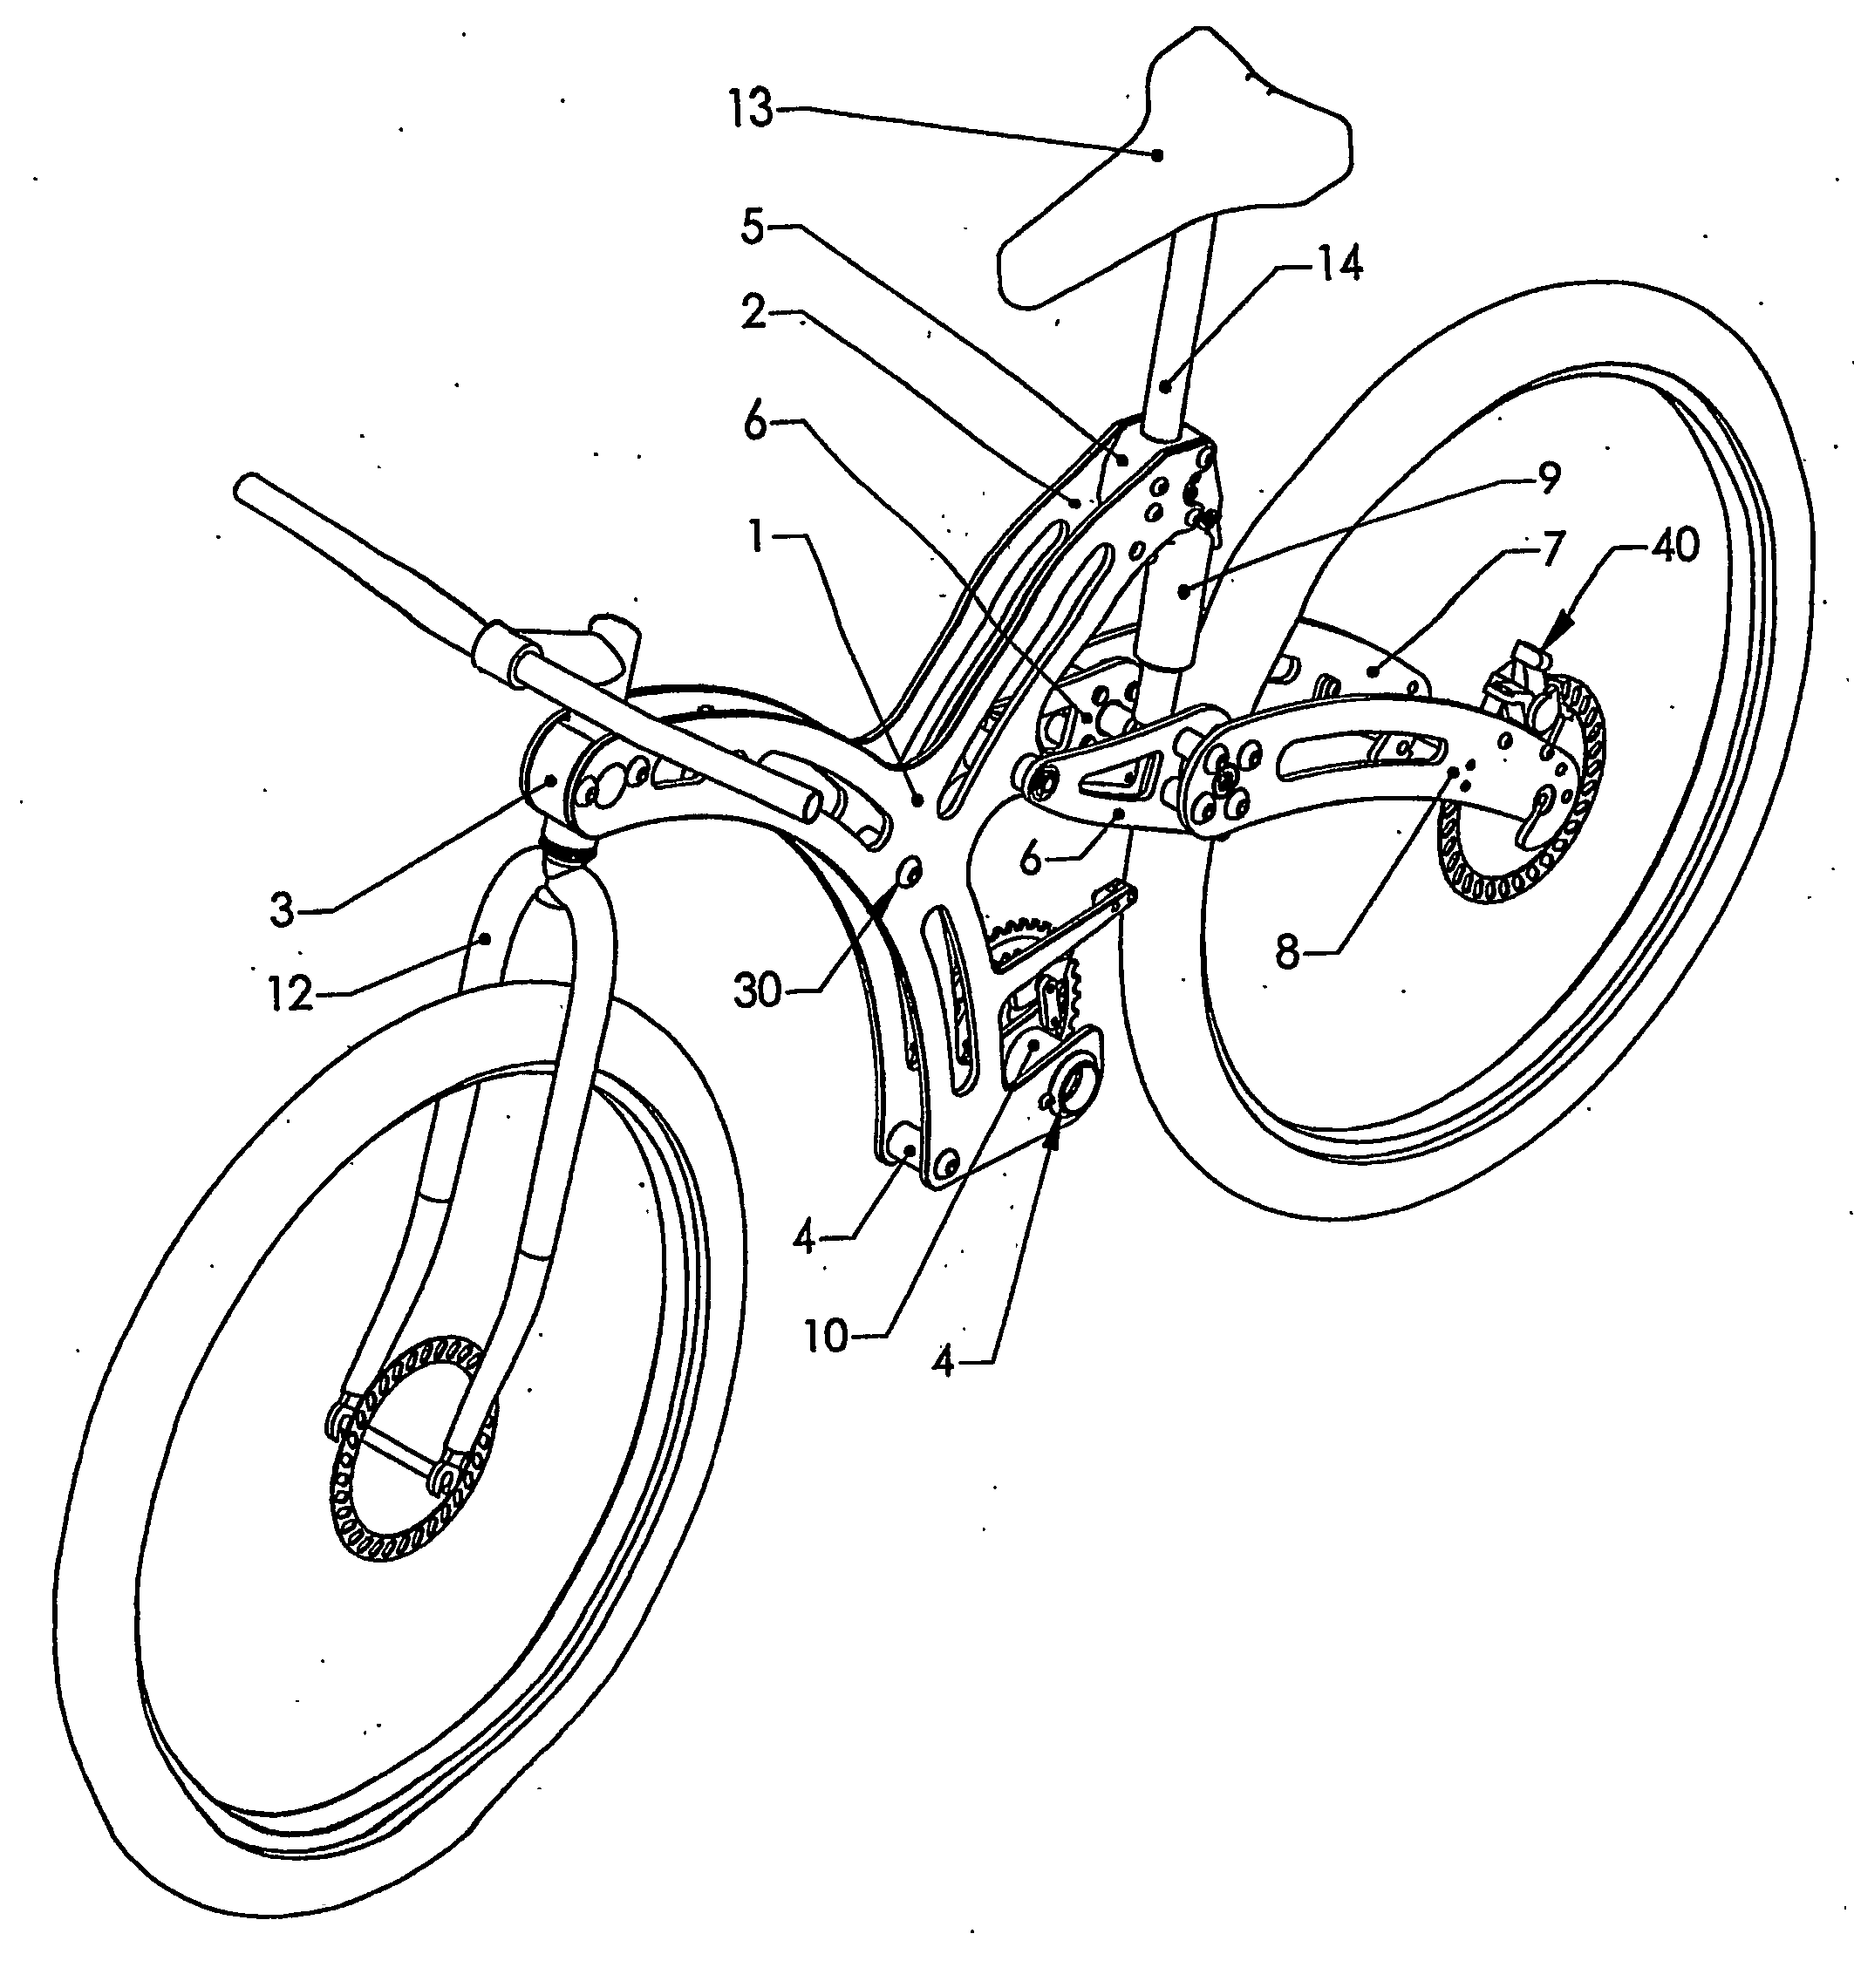 Folding bicycle constructed from plate frame elements